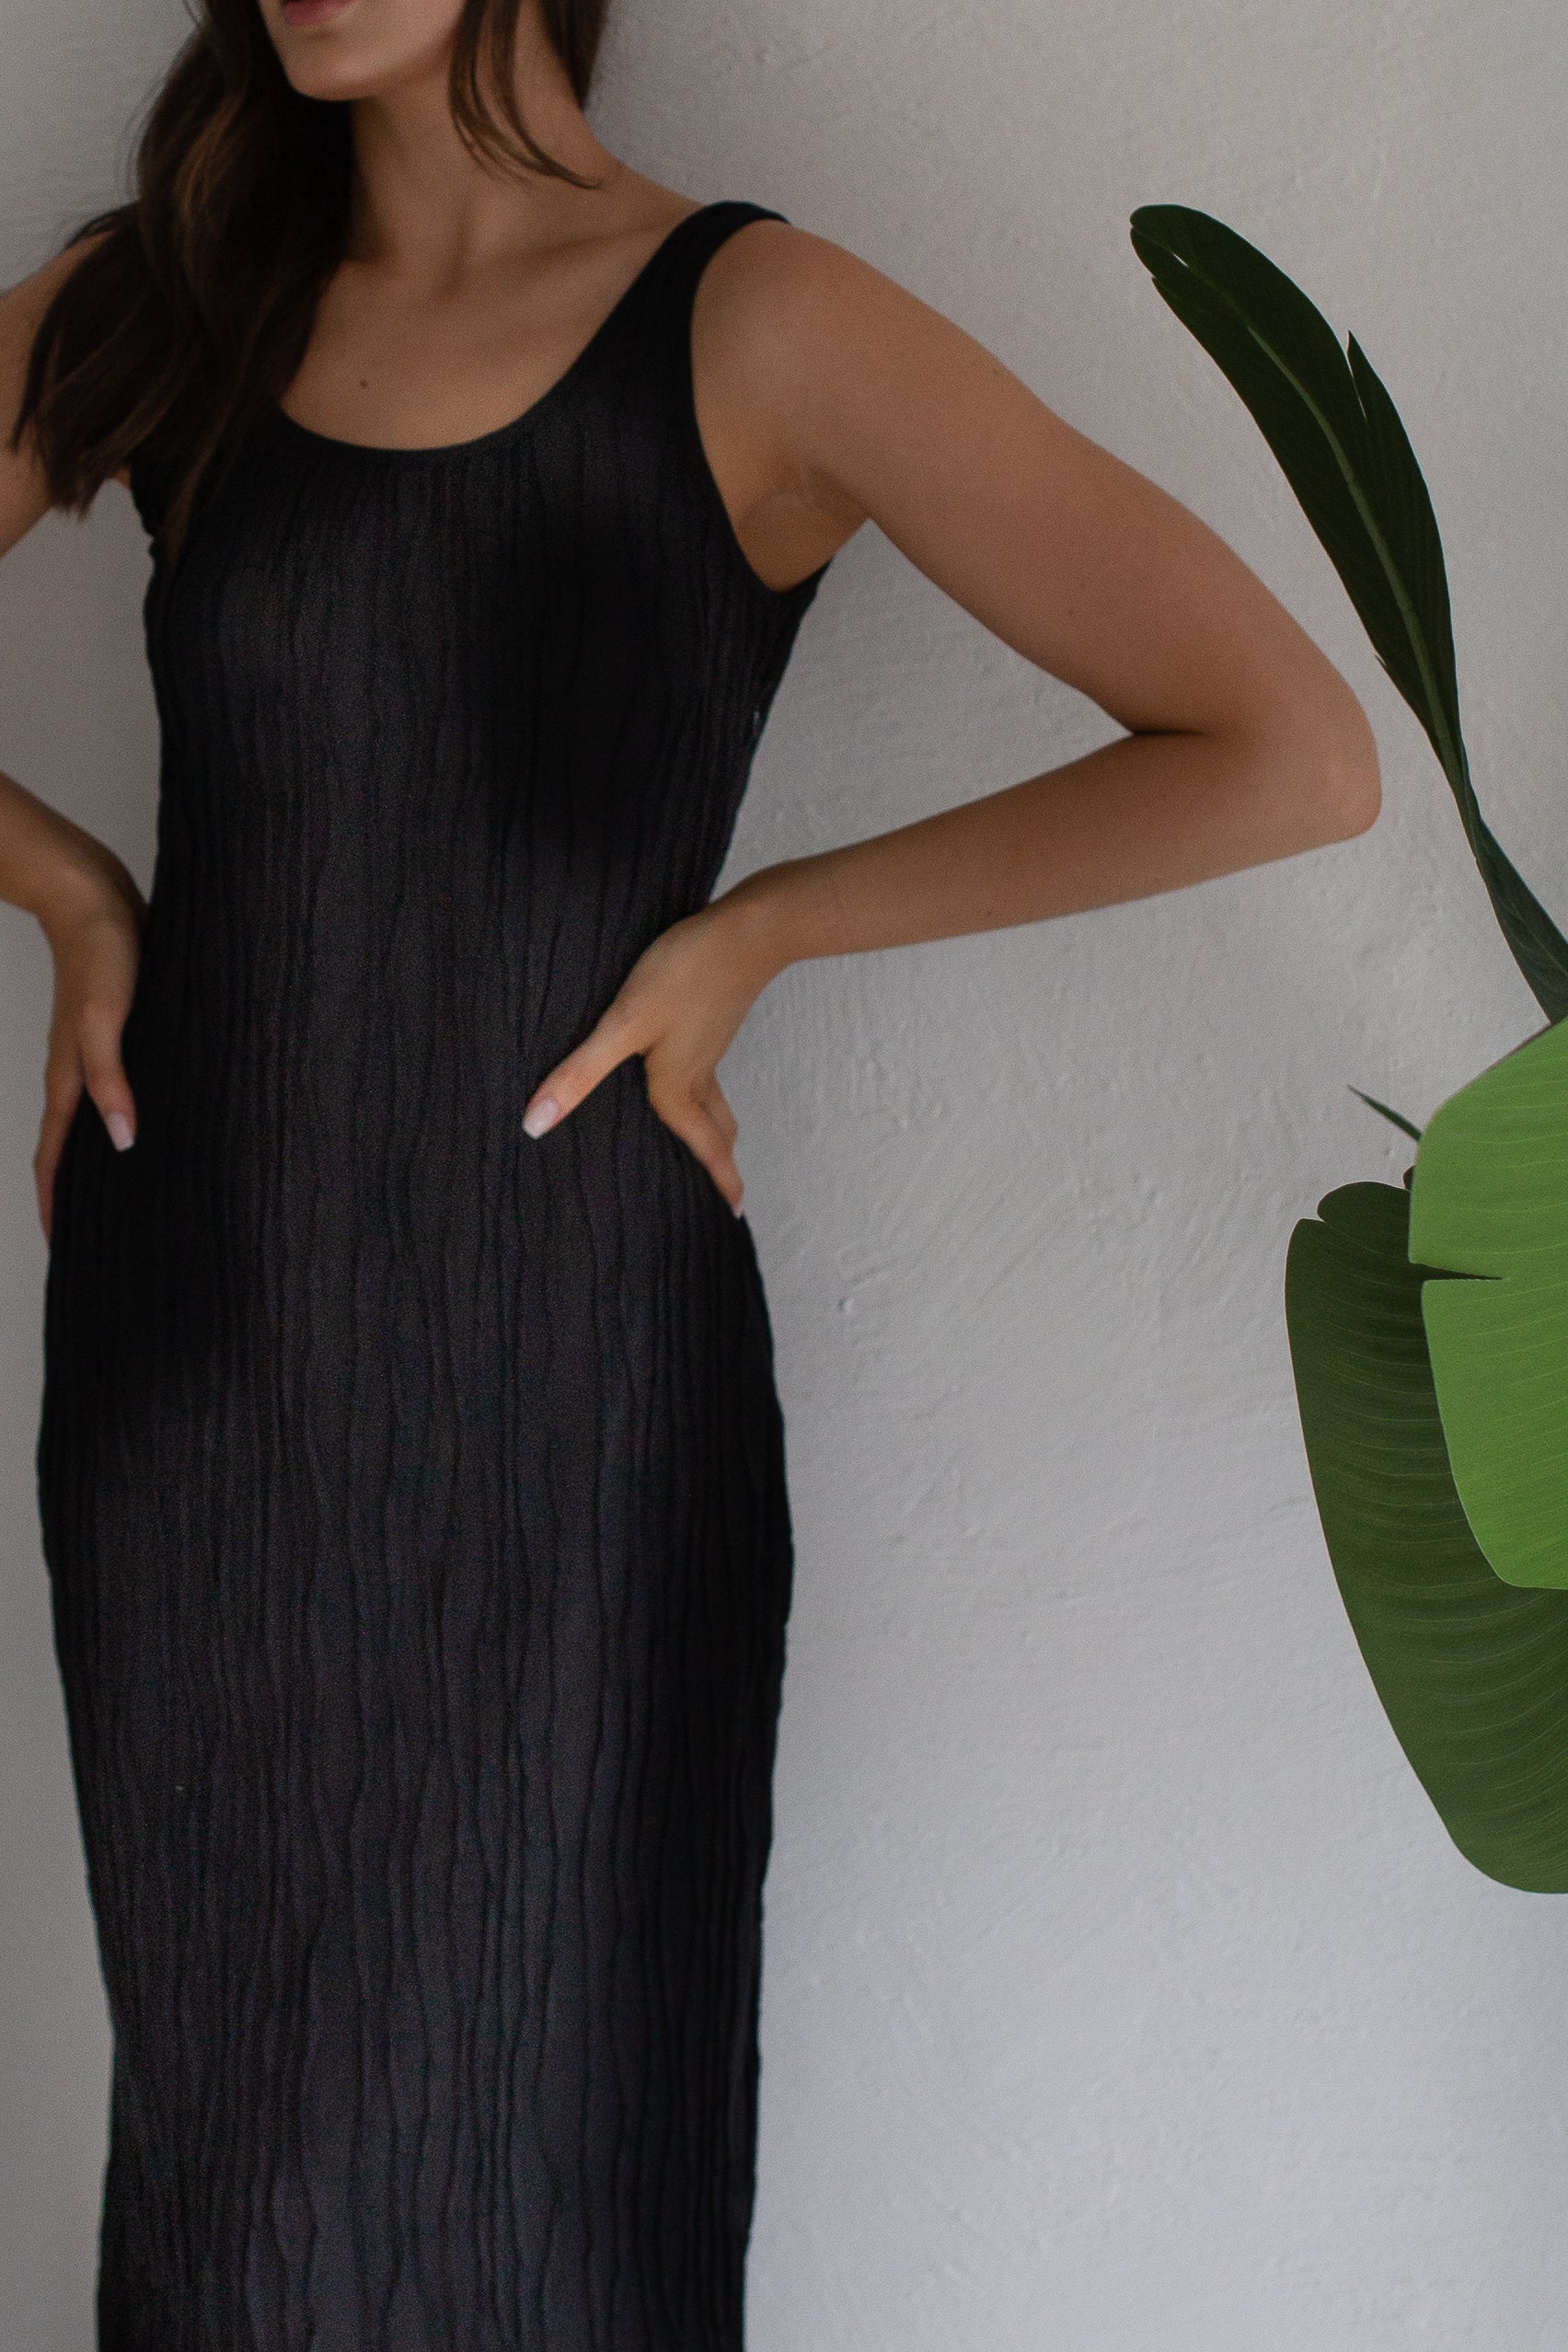 The Wave Dress in Black